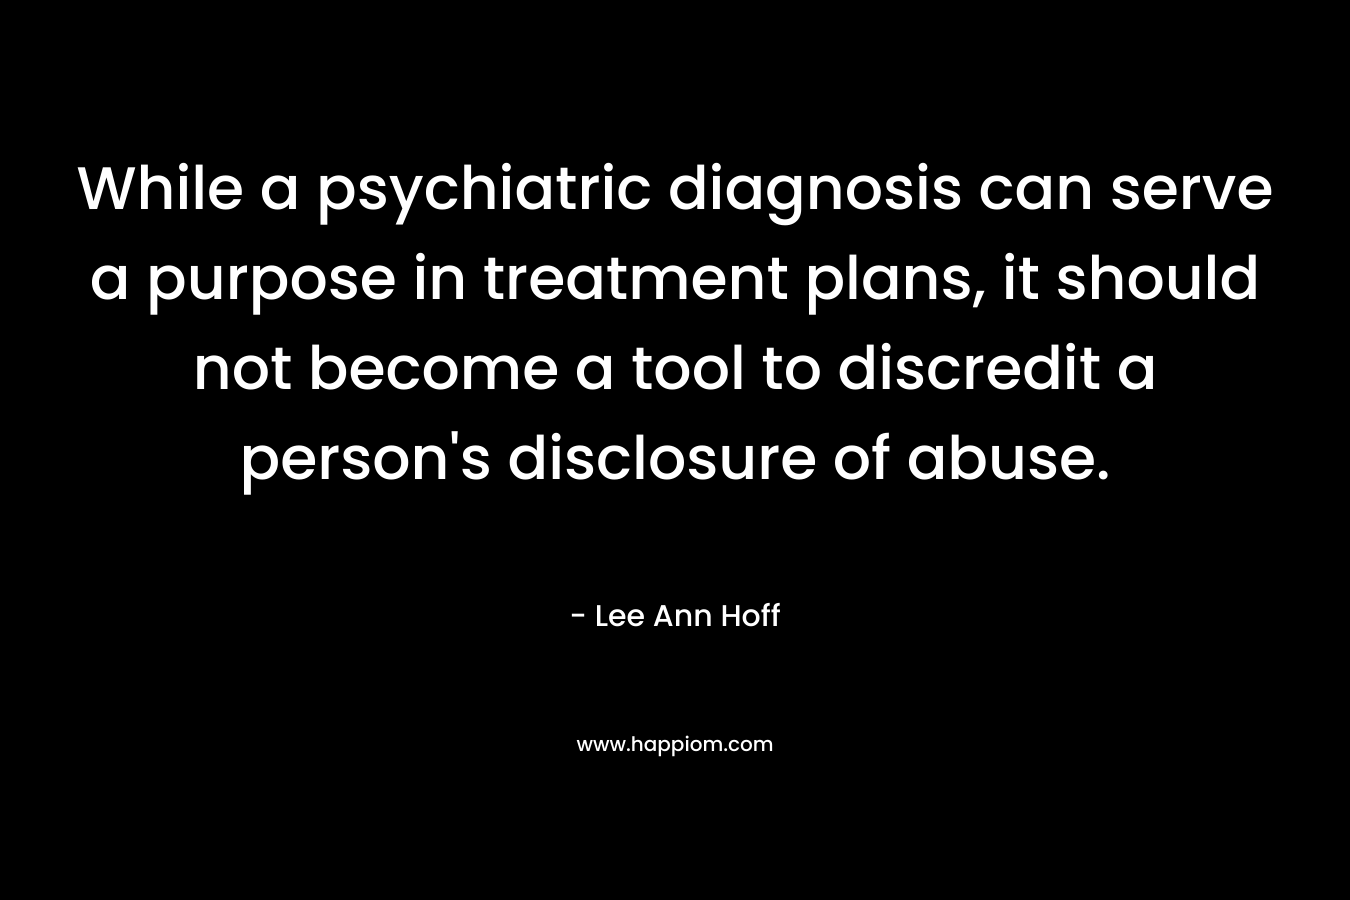 While a psychiatric diagnosis can serve a purpose in treatment plans, it should not become a tool to discredit a person’s disclosure of abuse. – Lee Ann Hoff